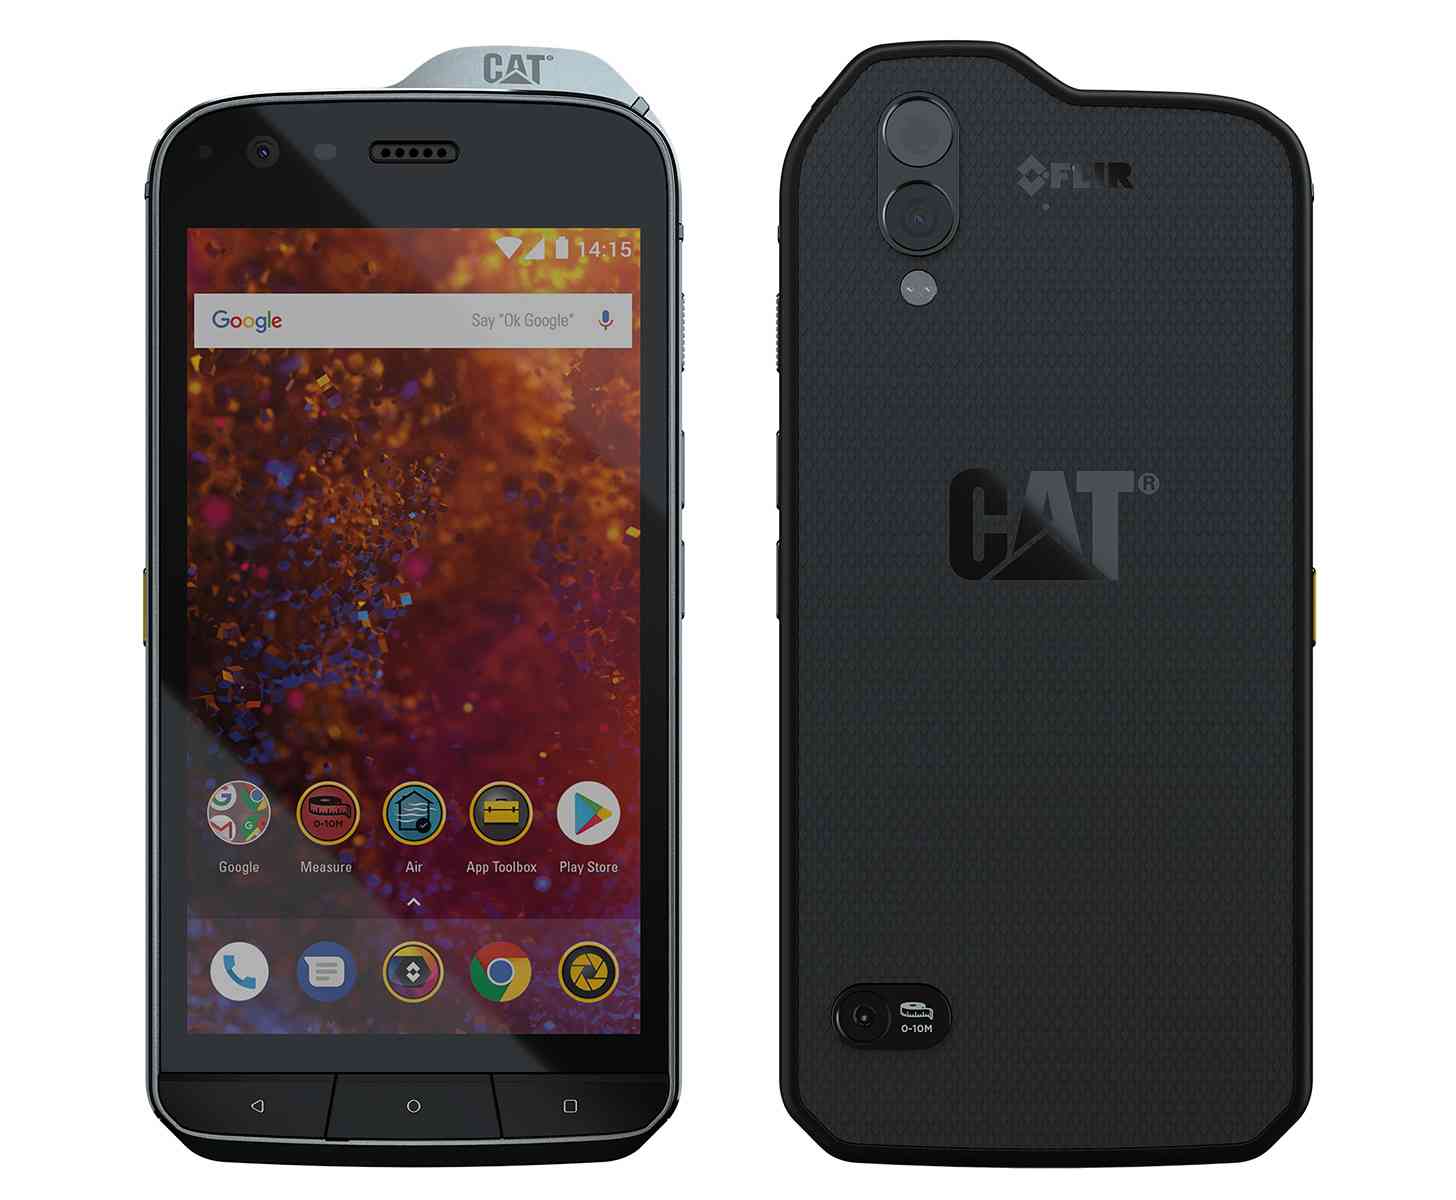  Cat  S61 is a rugged Android Oreo phone  with thermal 